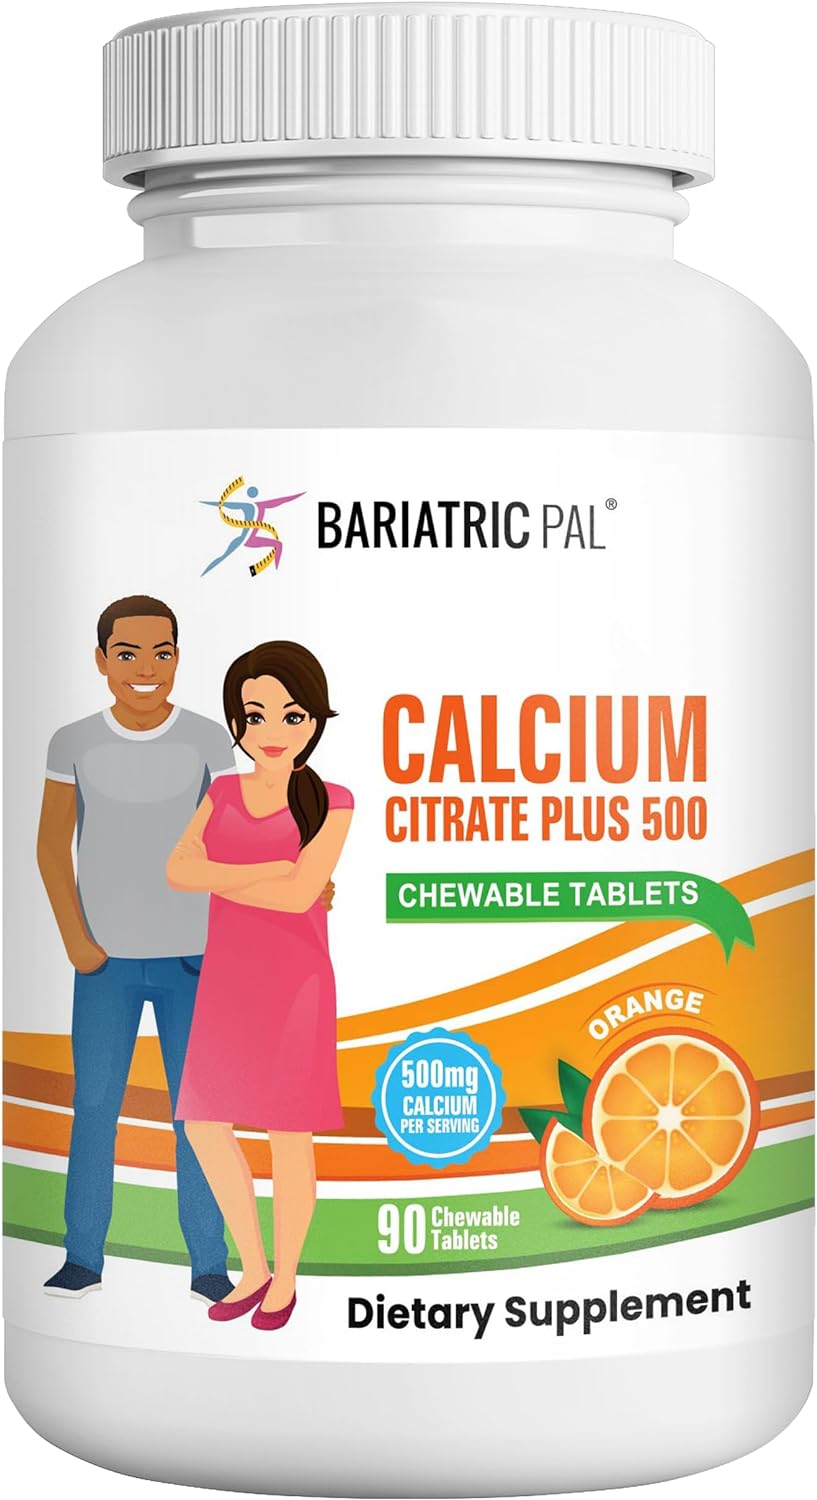 BariatricPal Calcium Citrate 500mg Chewable Tablets - Orange (30-Day Supply)